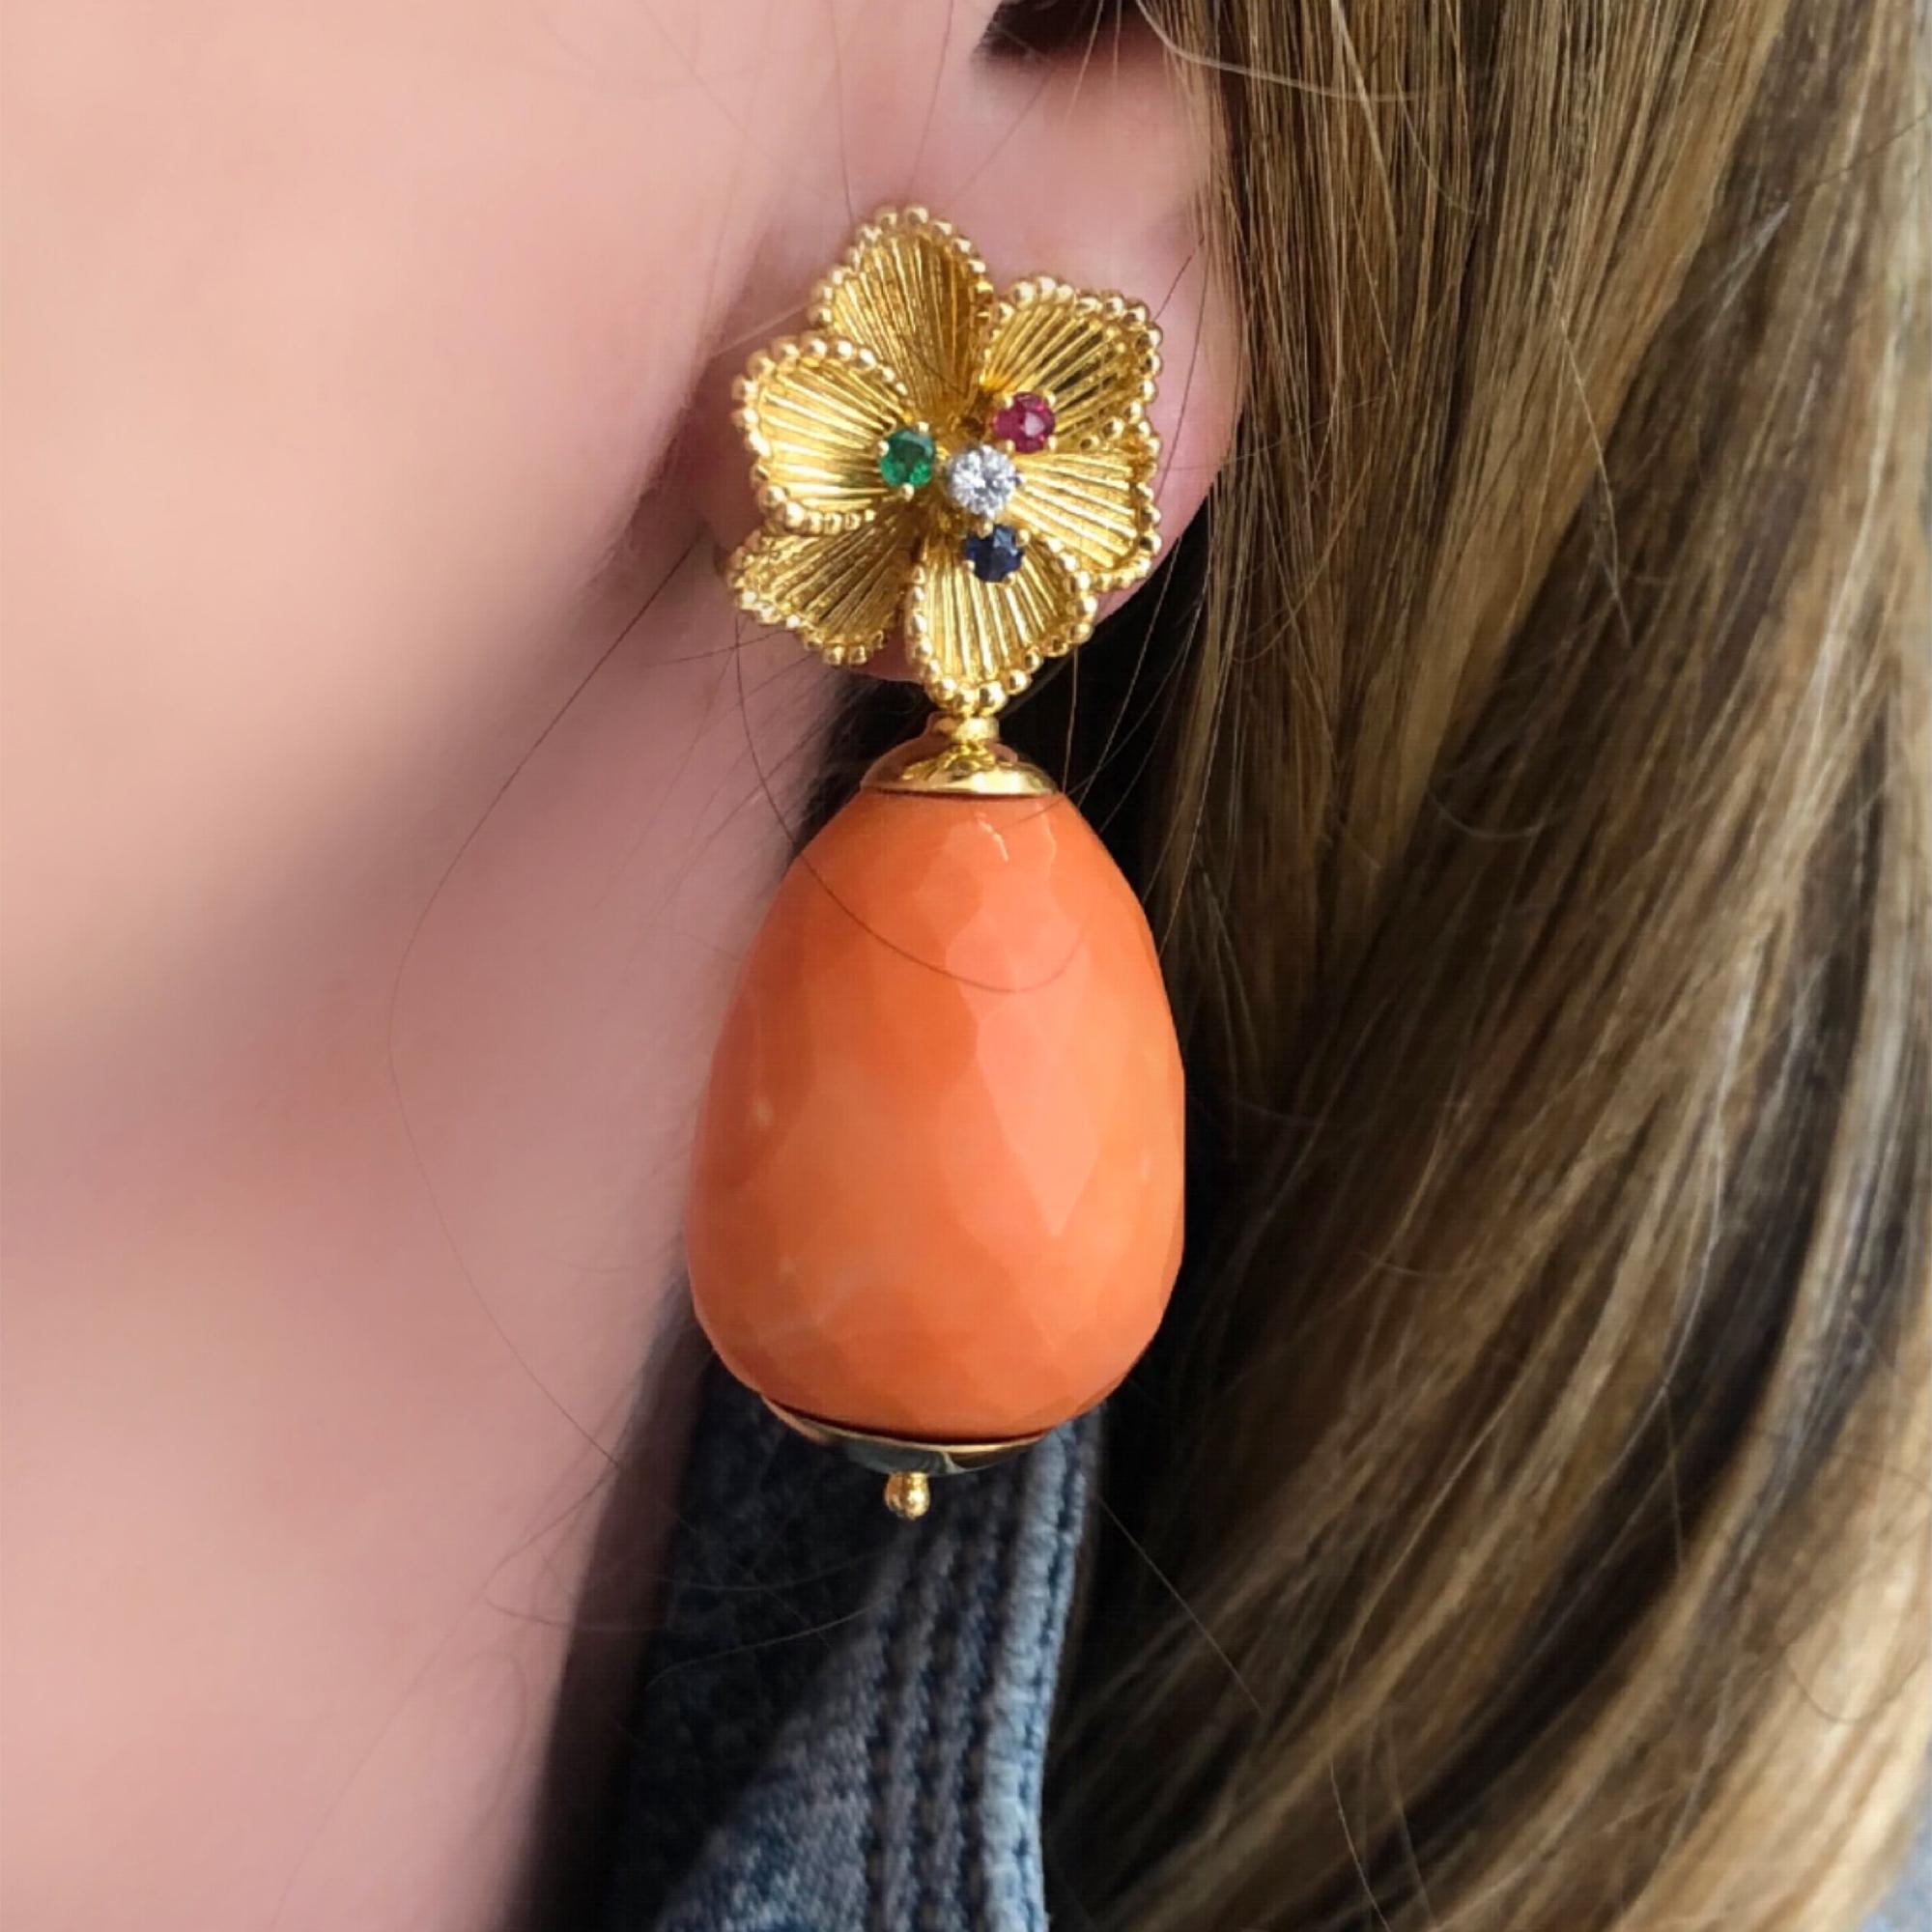 Mixed Cut Pair of Signed Danfrere Day and Night Coral Dangling Earrings with Floral Motifs